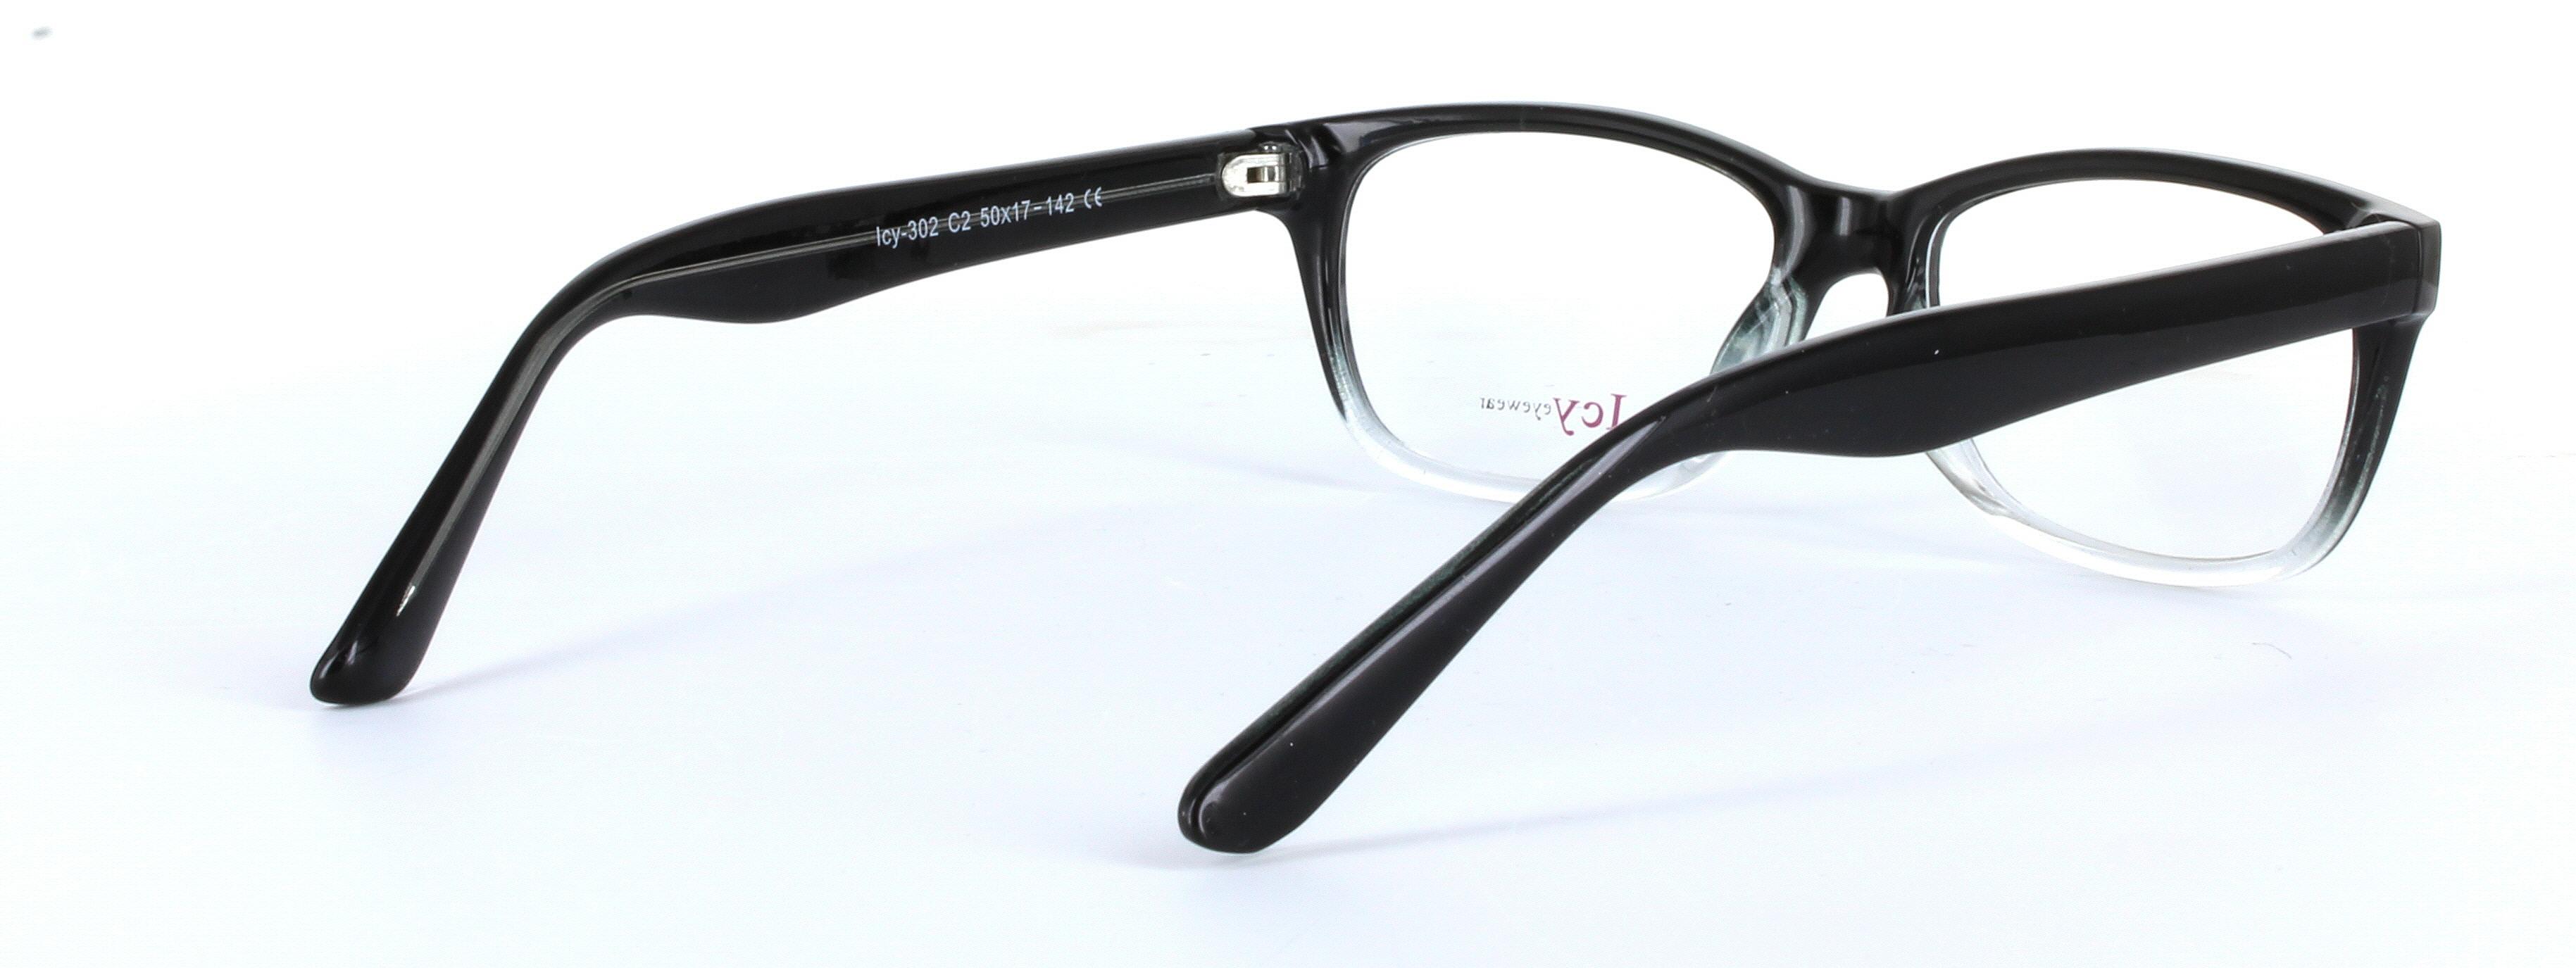 Bailey Black and Clear Full Rim Oval Square Plastic Glasses - Image View 4